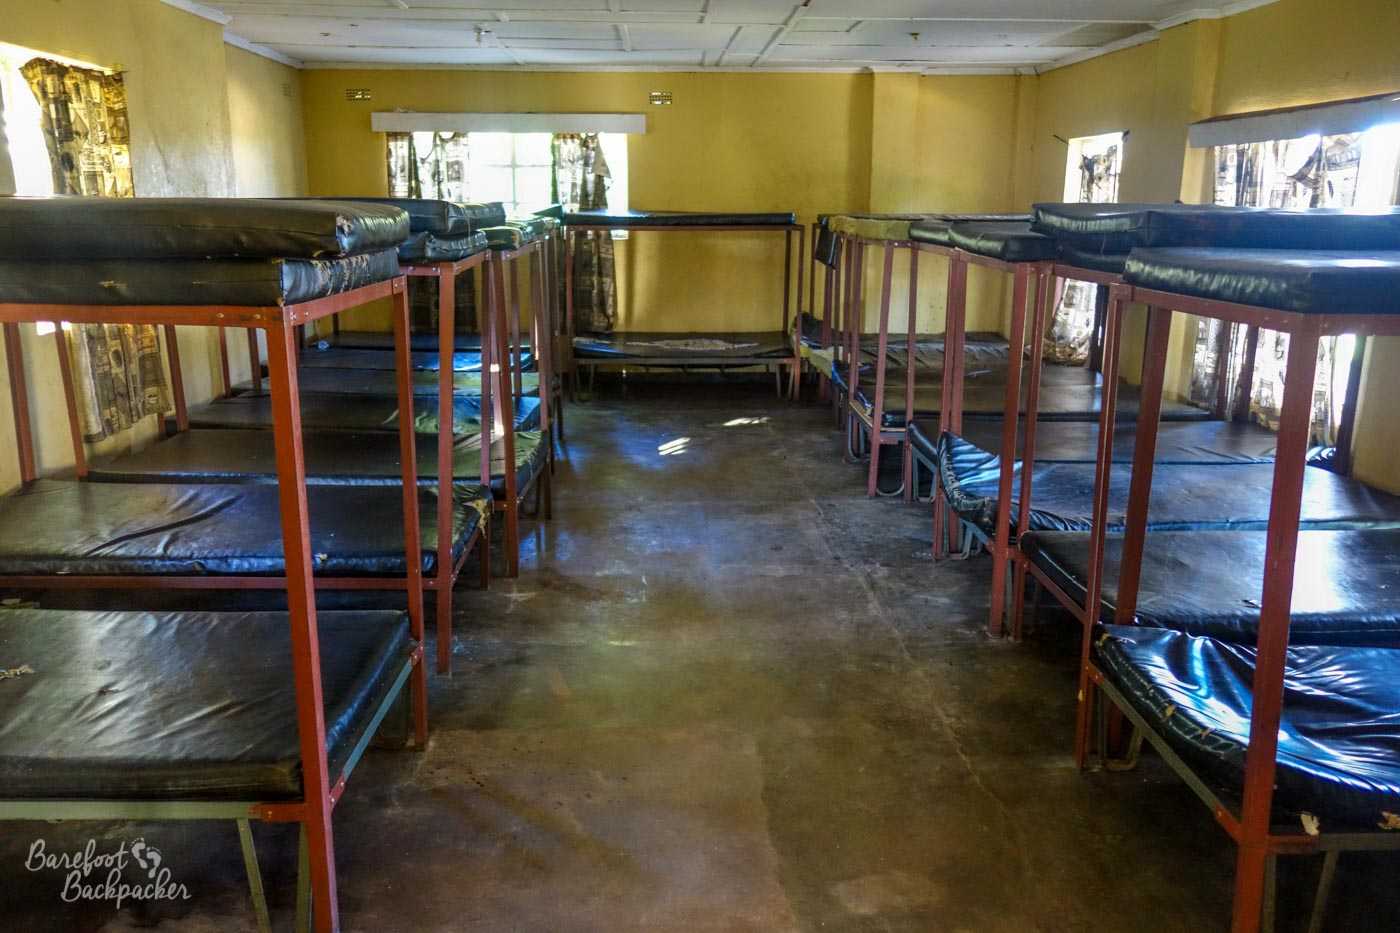 The empty, austere, minimalist, dorm room – the cheapest accommodation available. There's 28 beds in shot, in very close-fitting metal two-bunk beds, and there's a smaller room behind the camera with four more bunks.